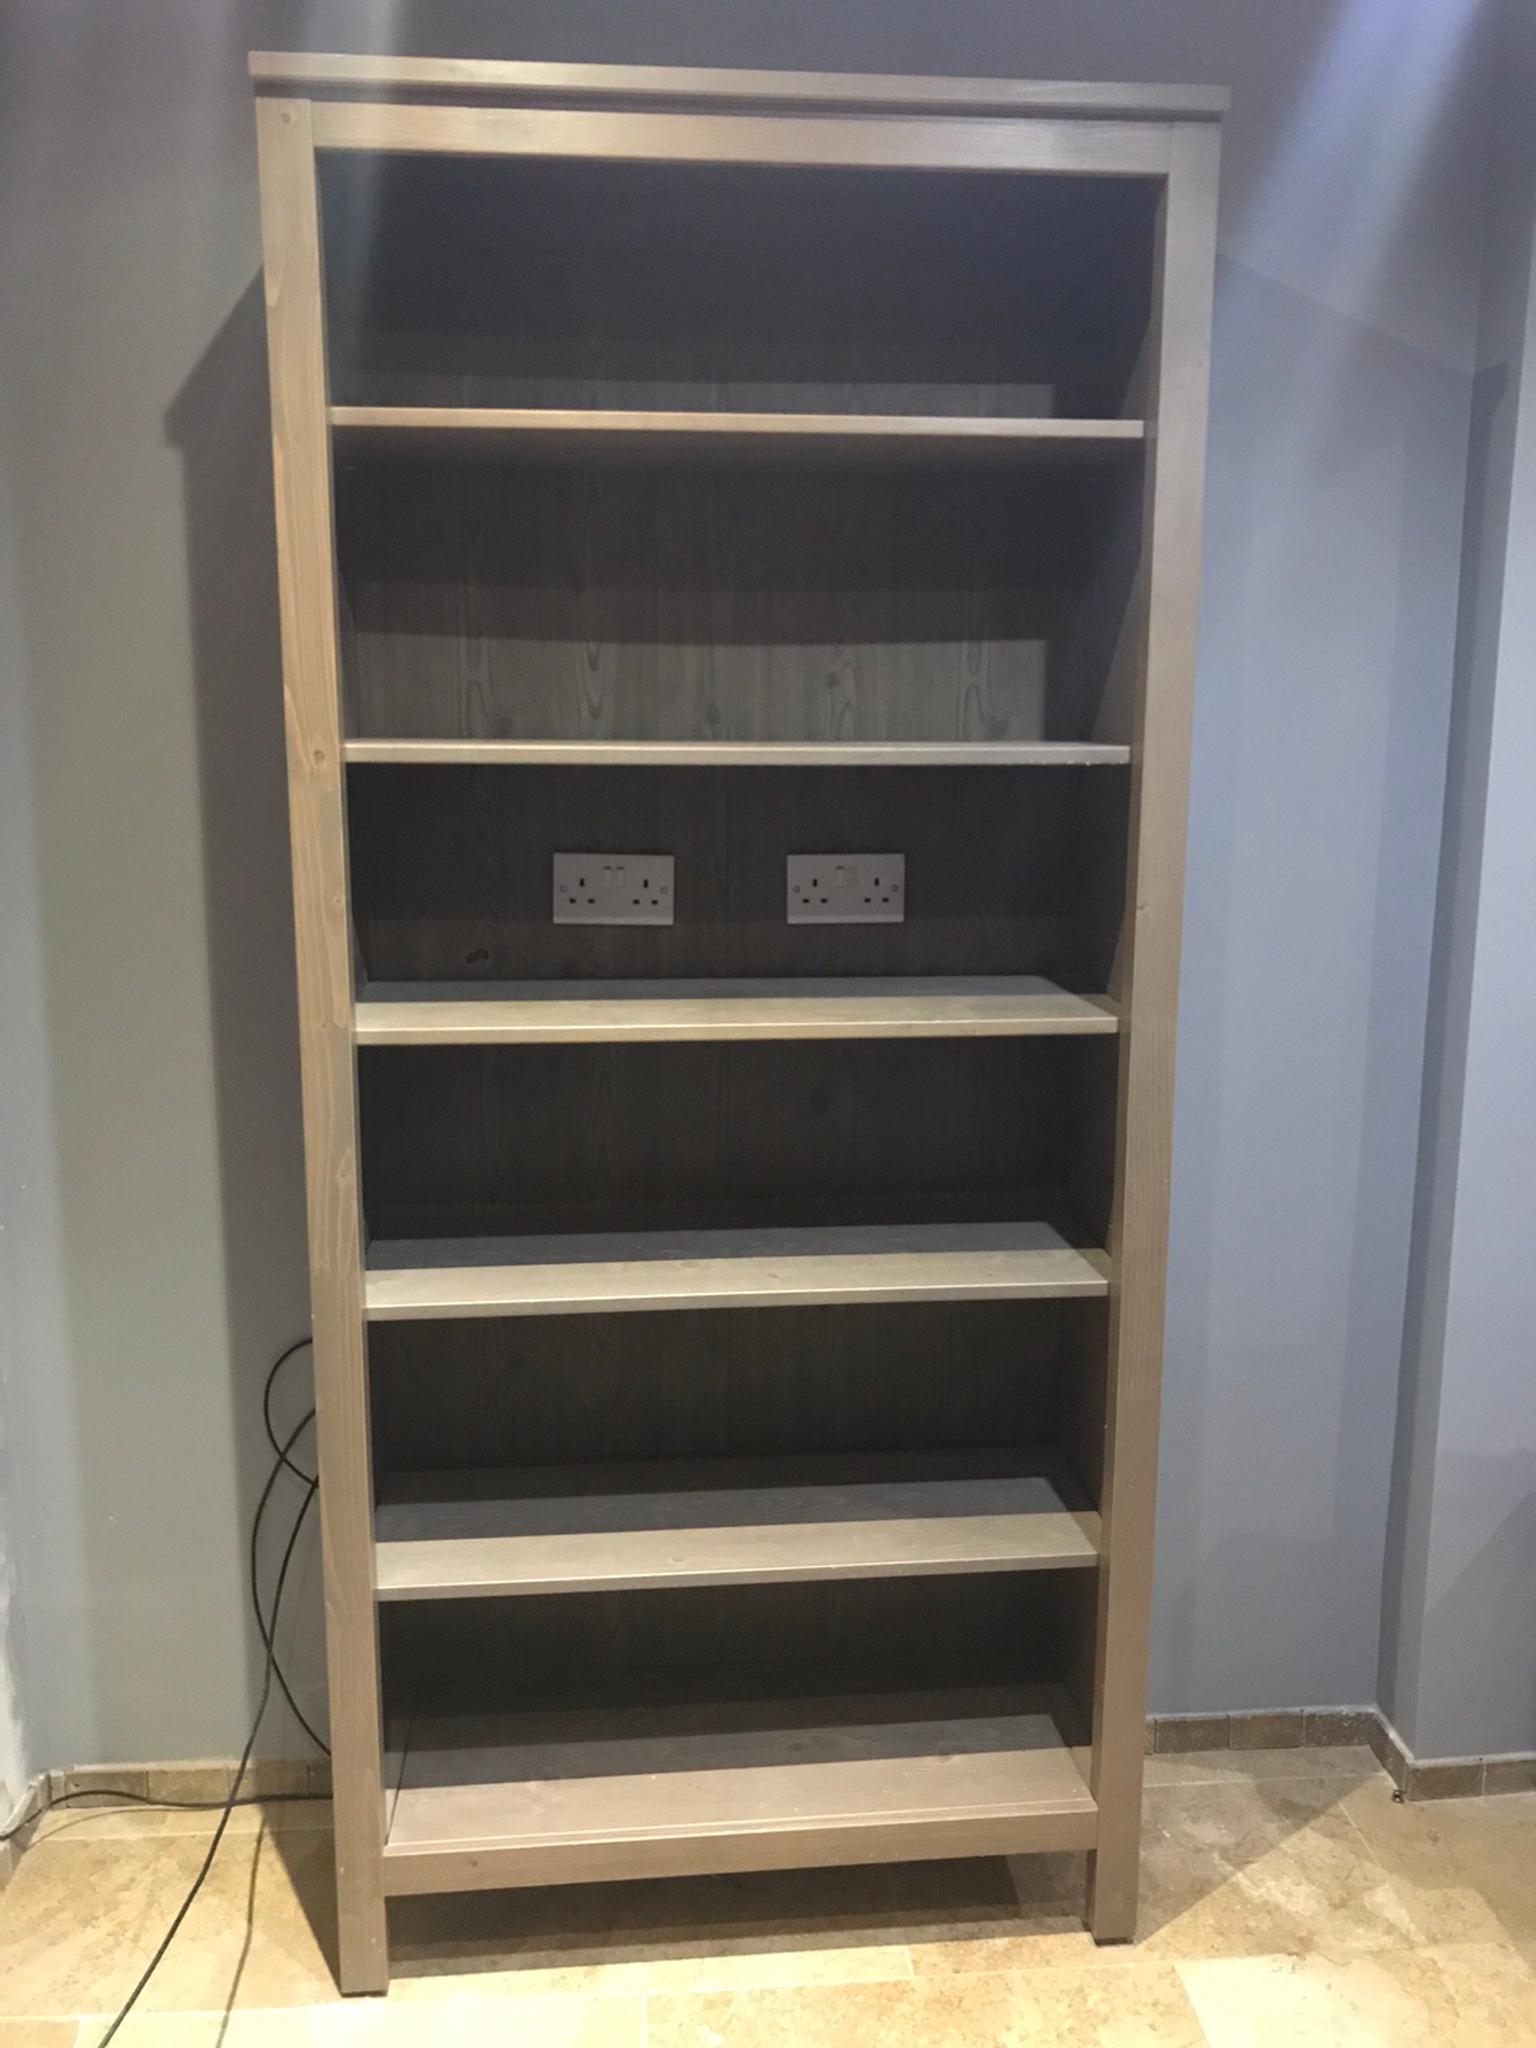 Ikea Hemnes Bookcase In L12 Liverpool For 40 00 For Sale Shpock